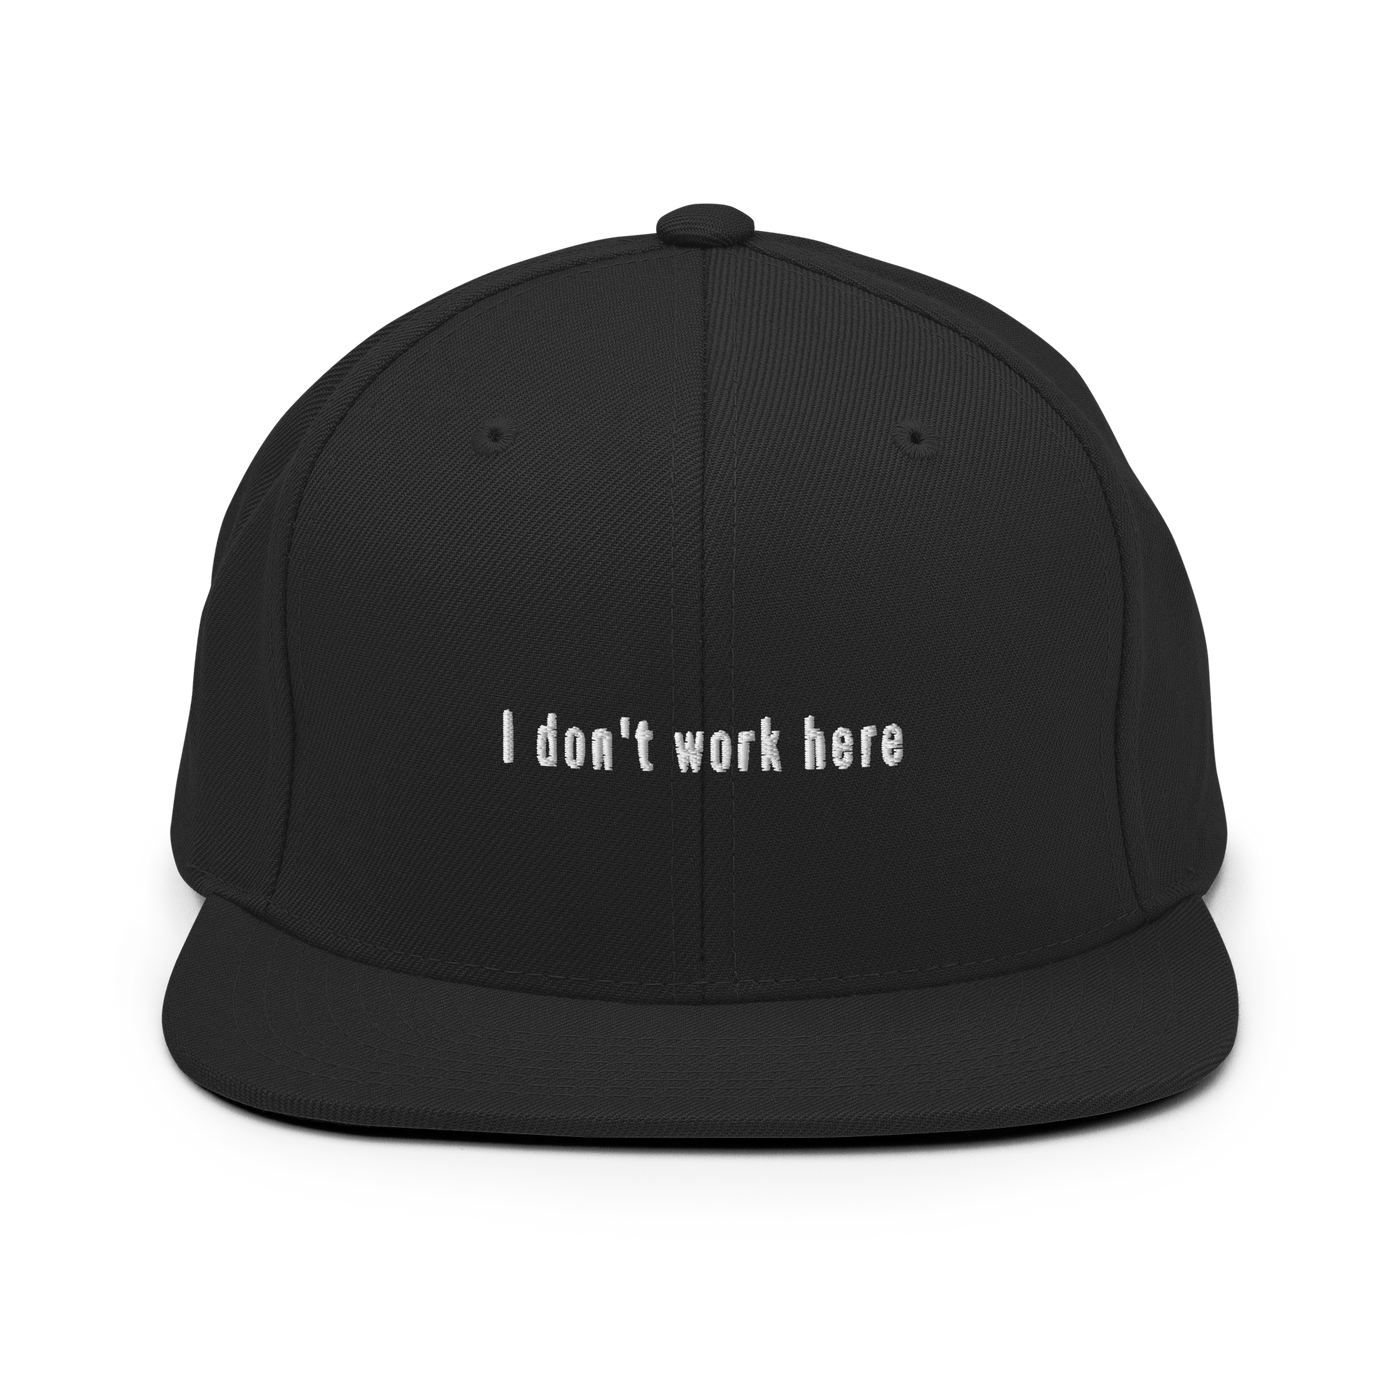 I don't work here Snapback Hat - Black - - Just Another Cap Store